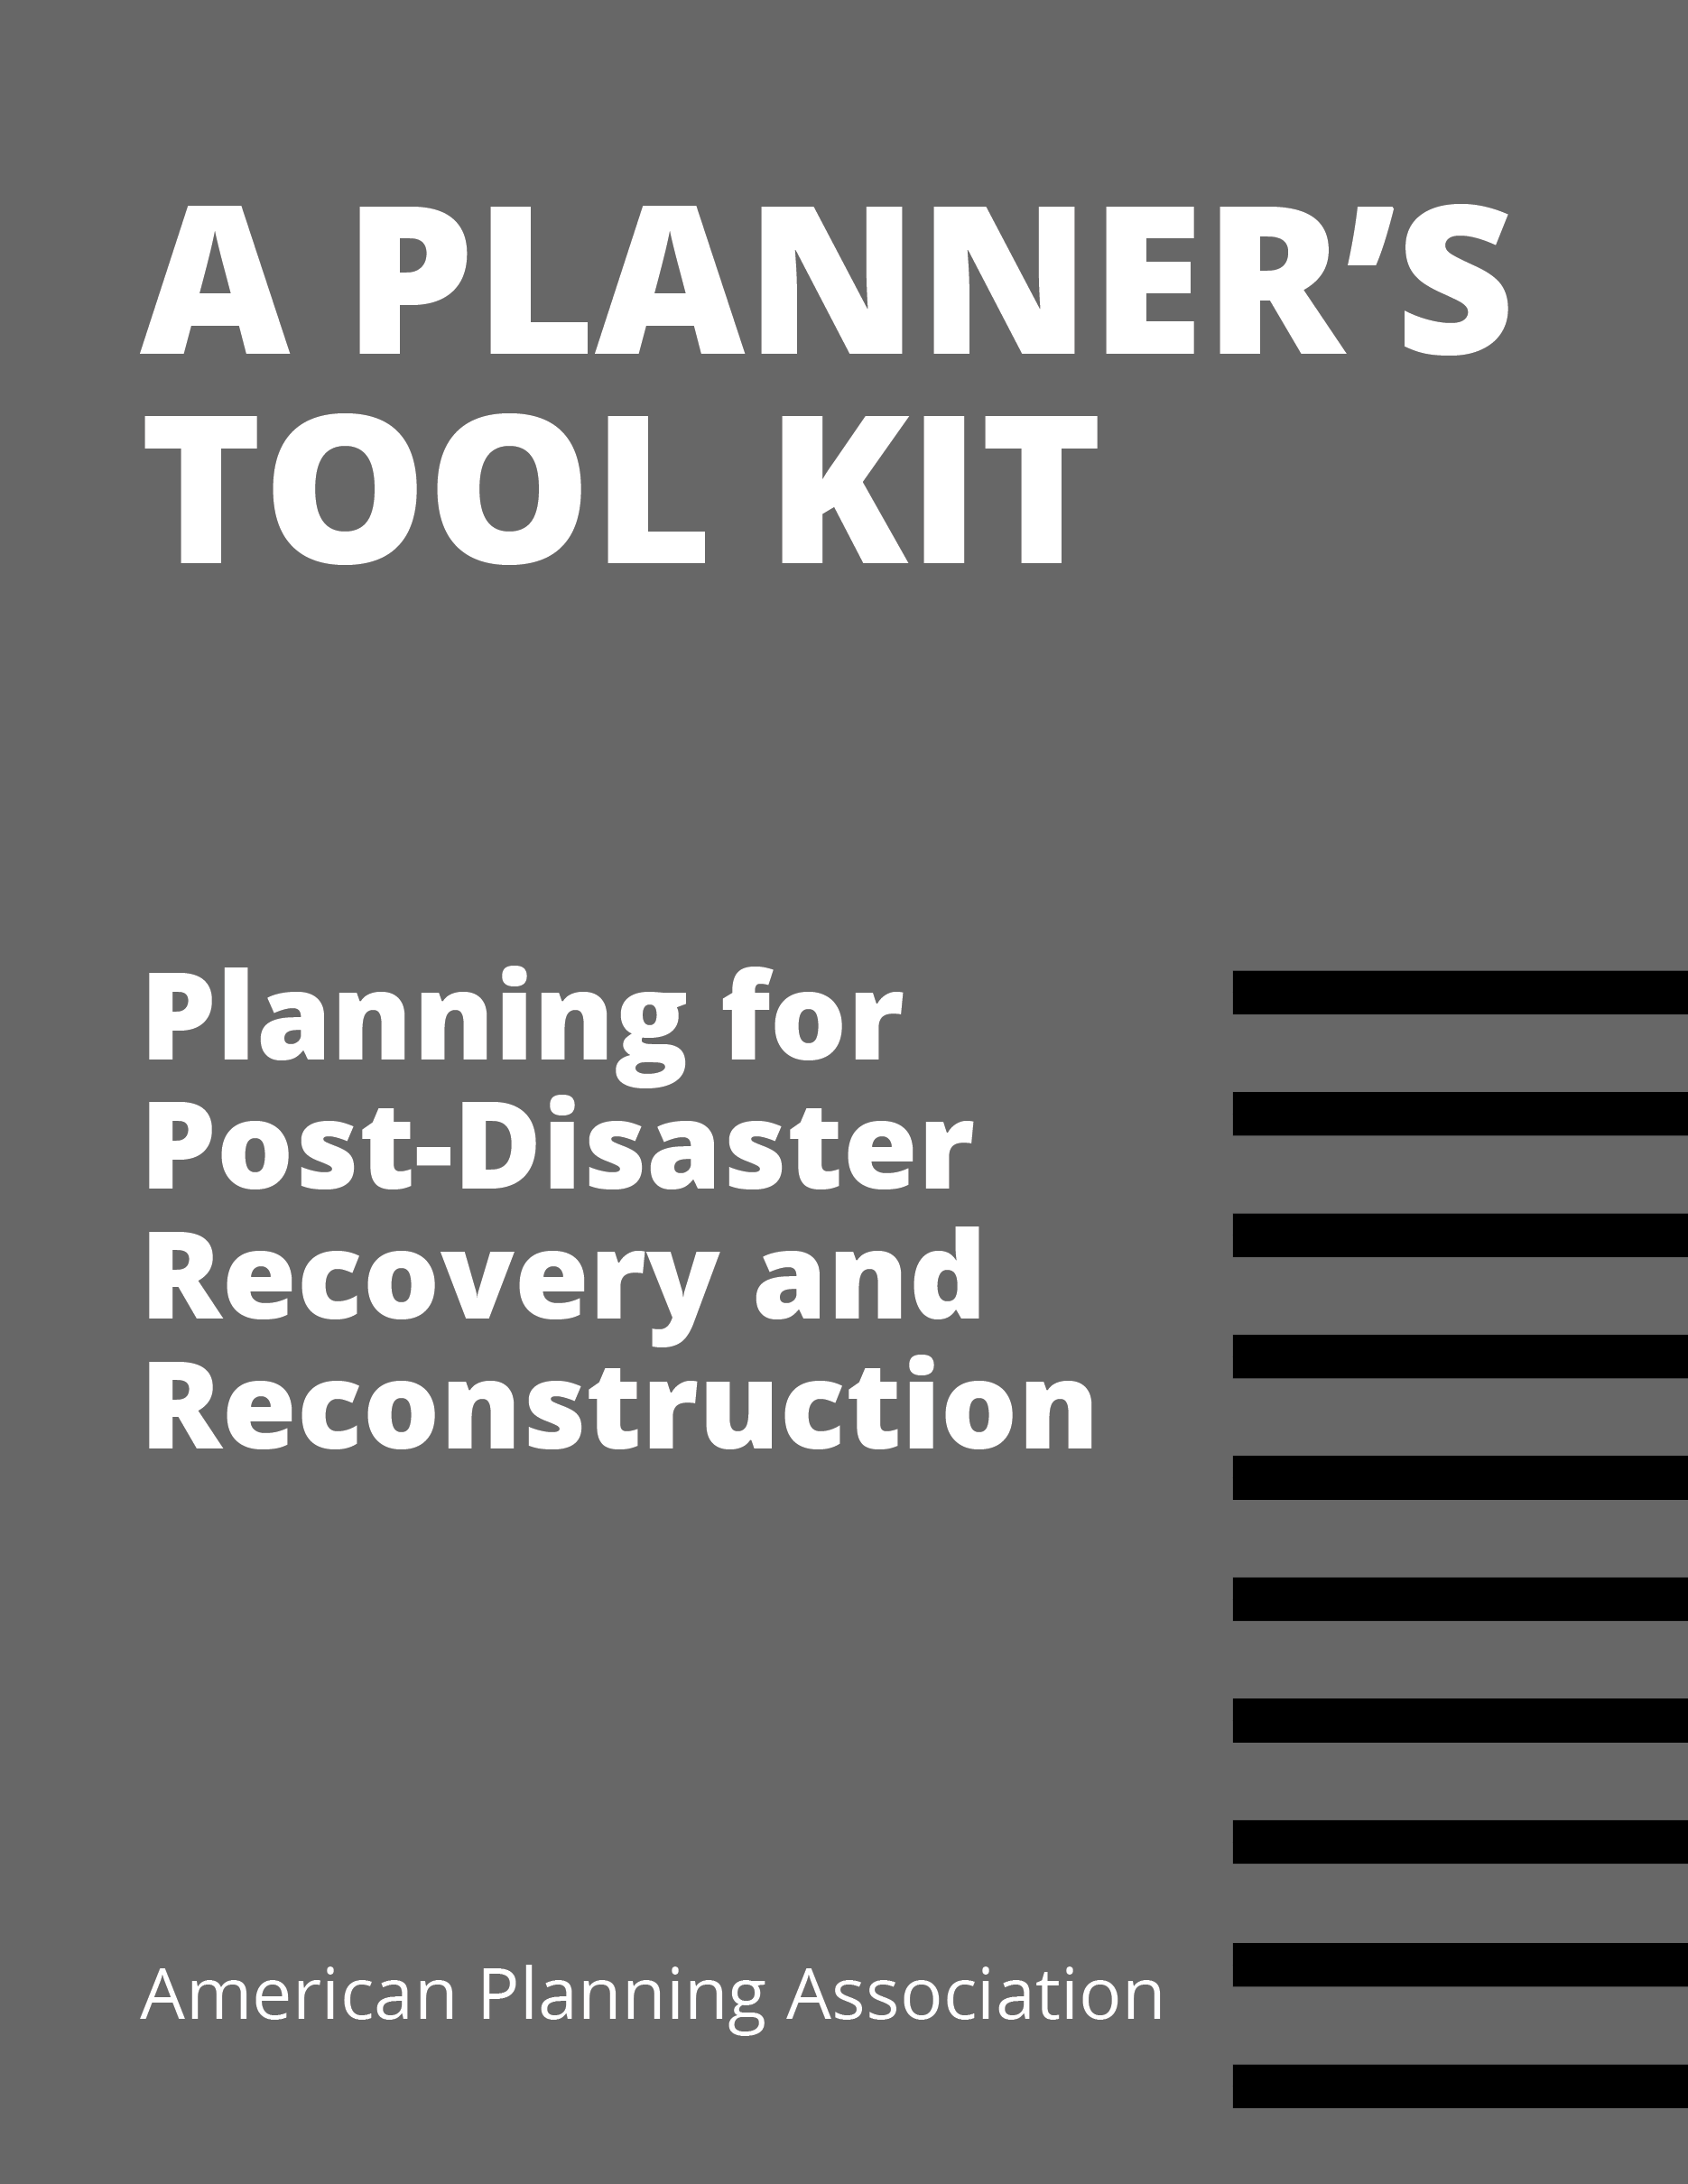 A Planner’s Tool Kit from Planning for Post-Disaster Recovery and Reconstruction